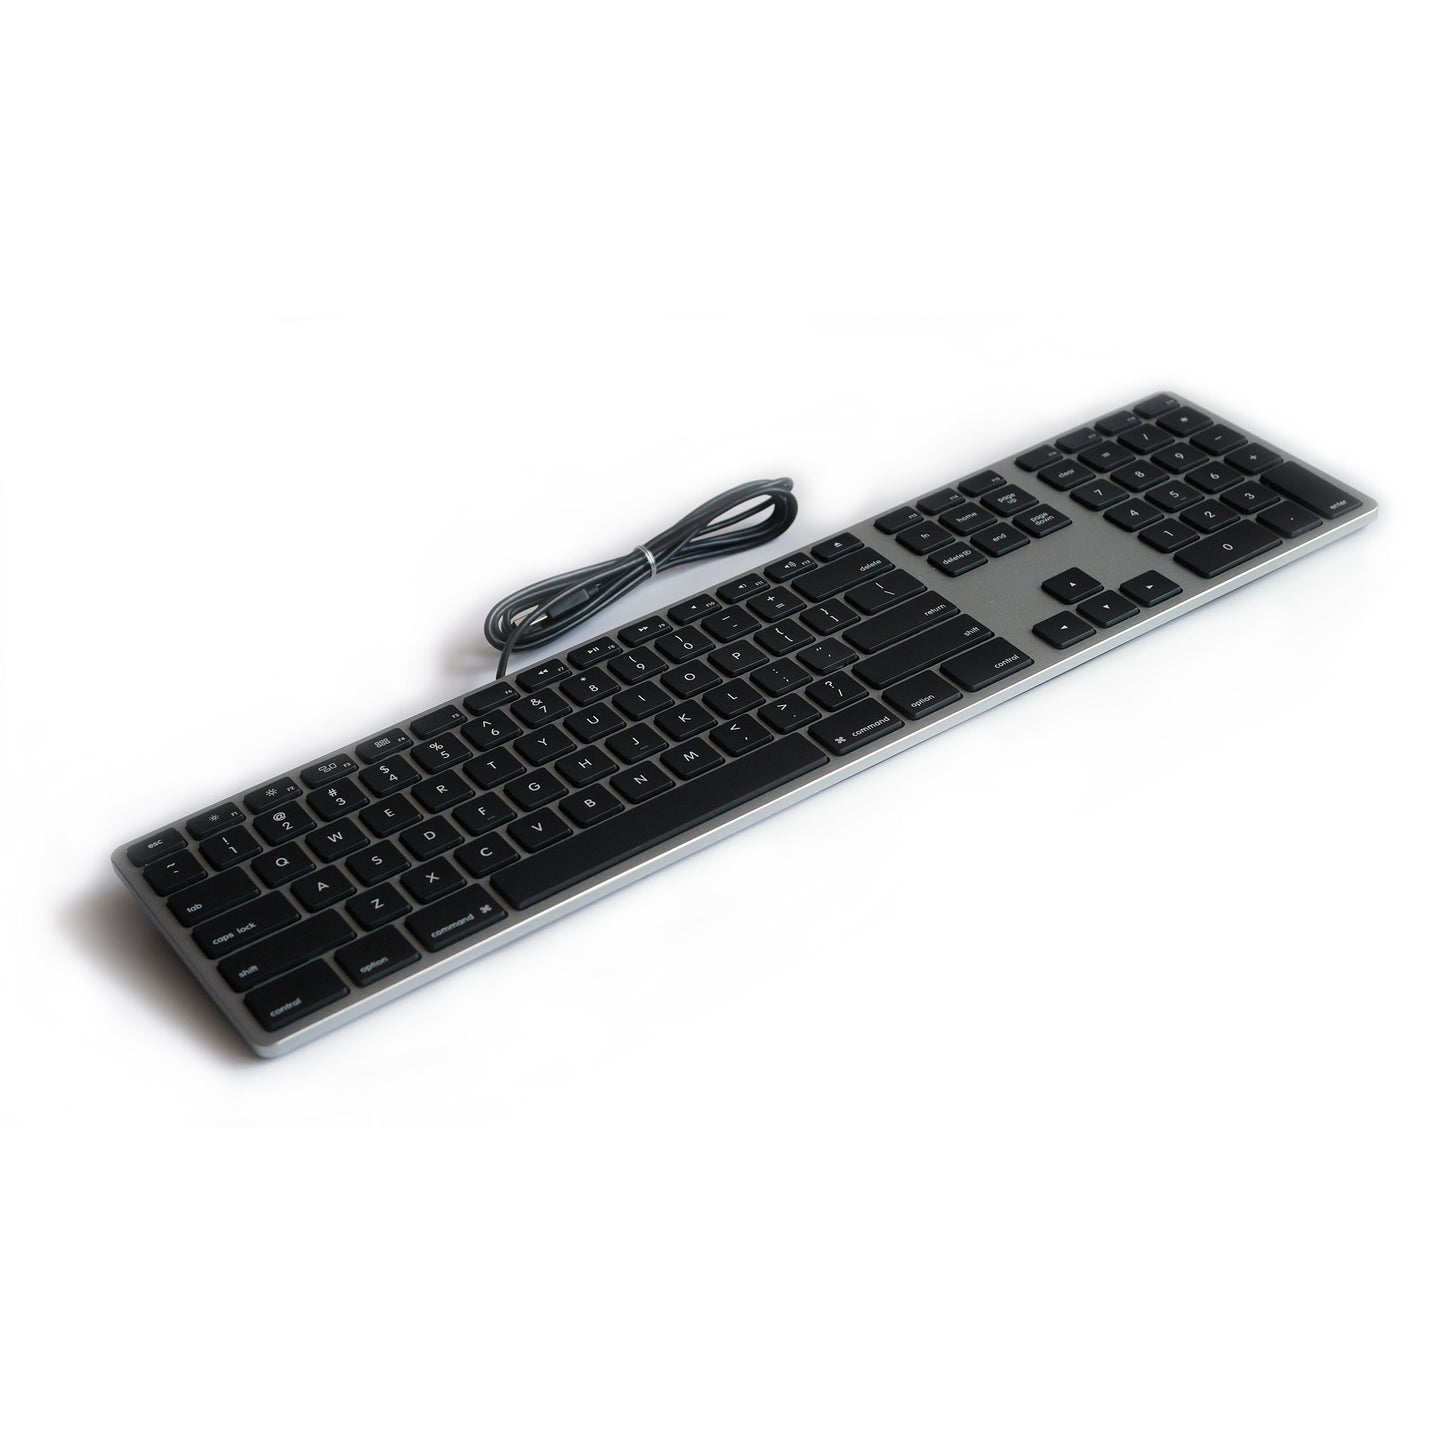 Wired Aluminum Keyboard for Mac - Space Gray